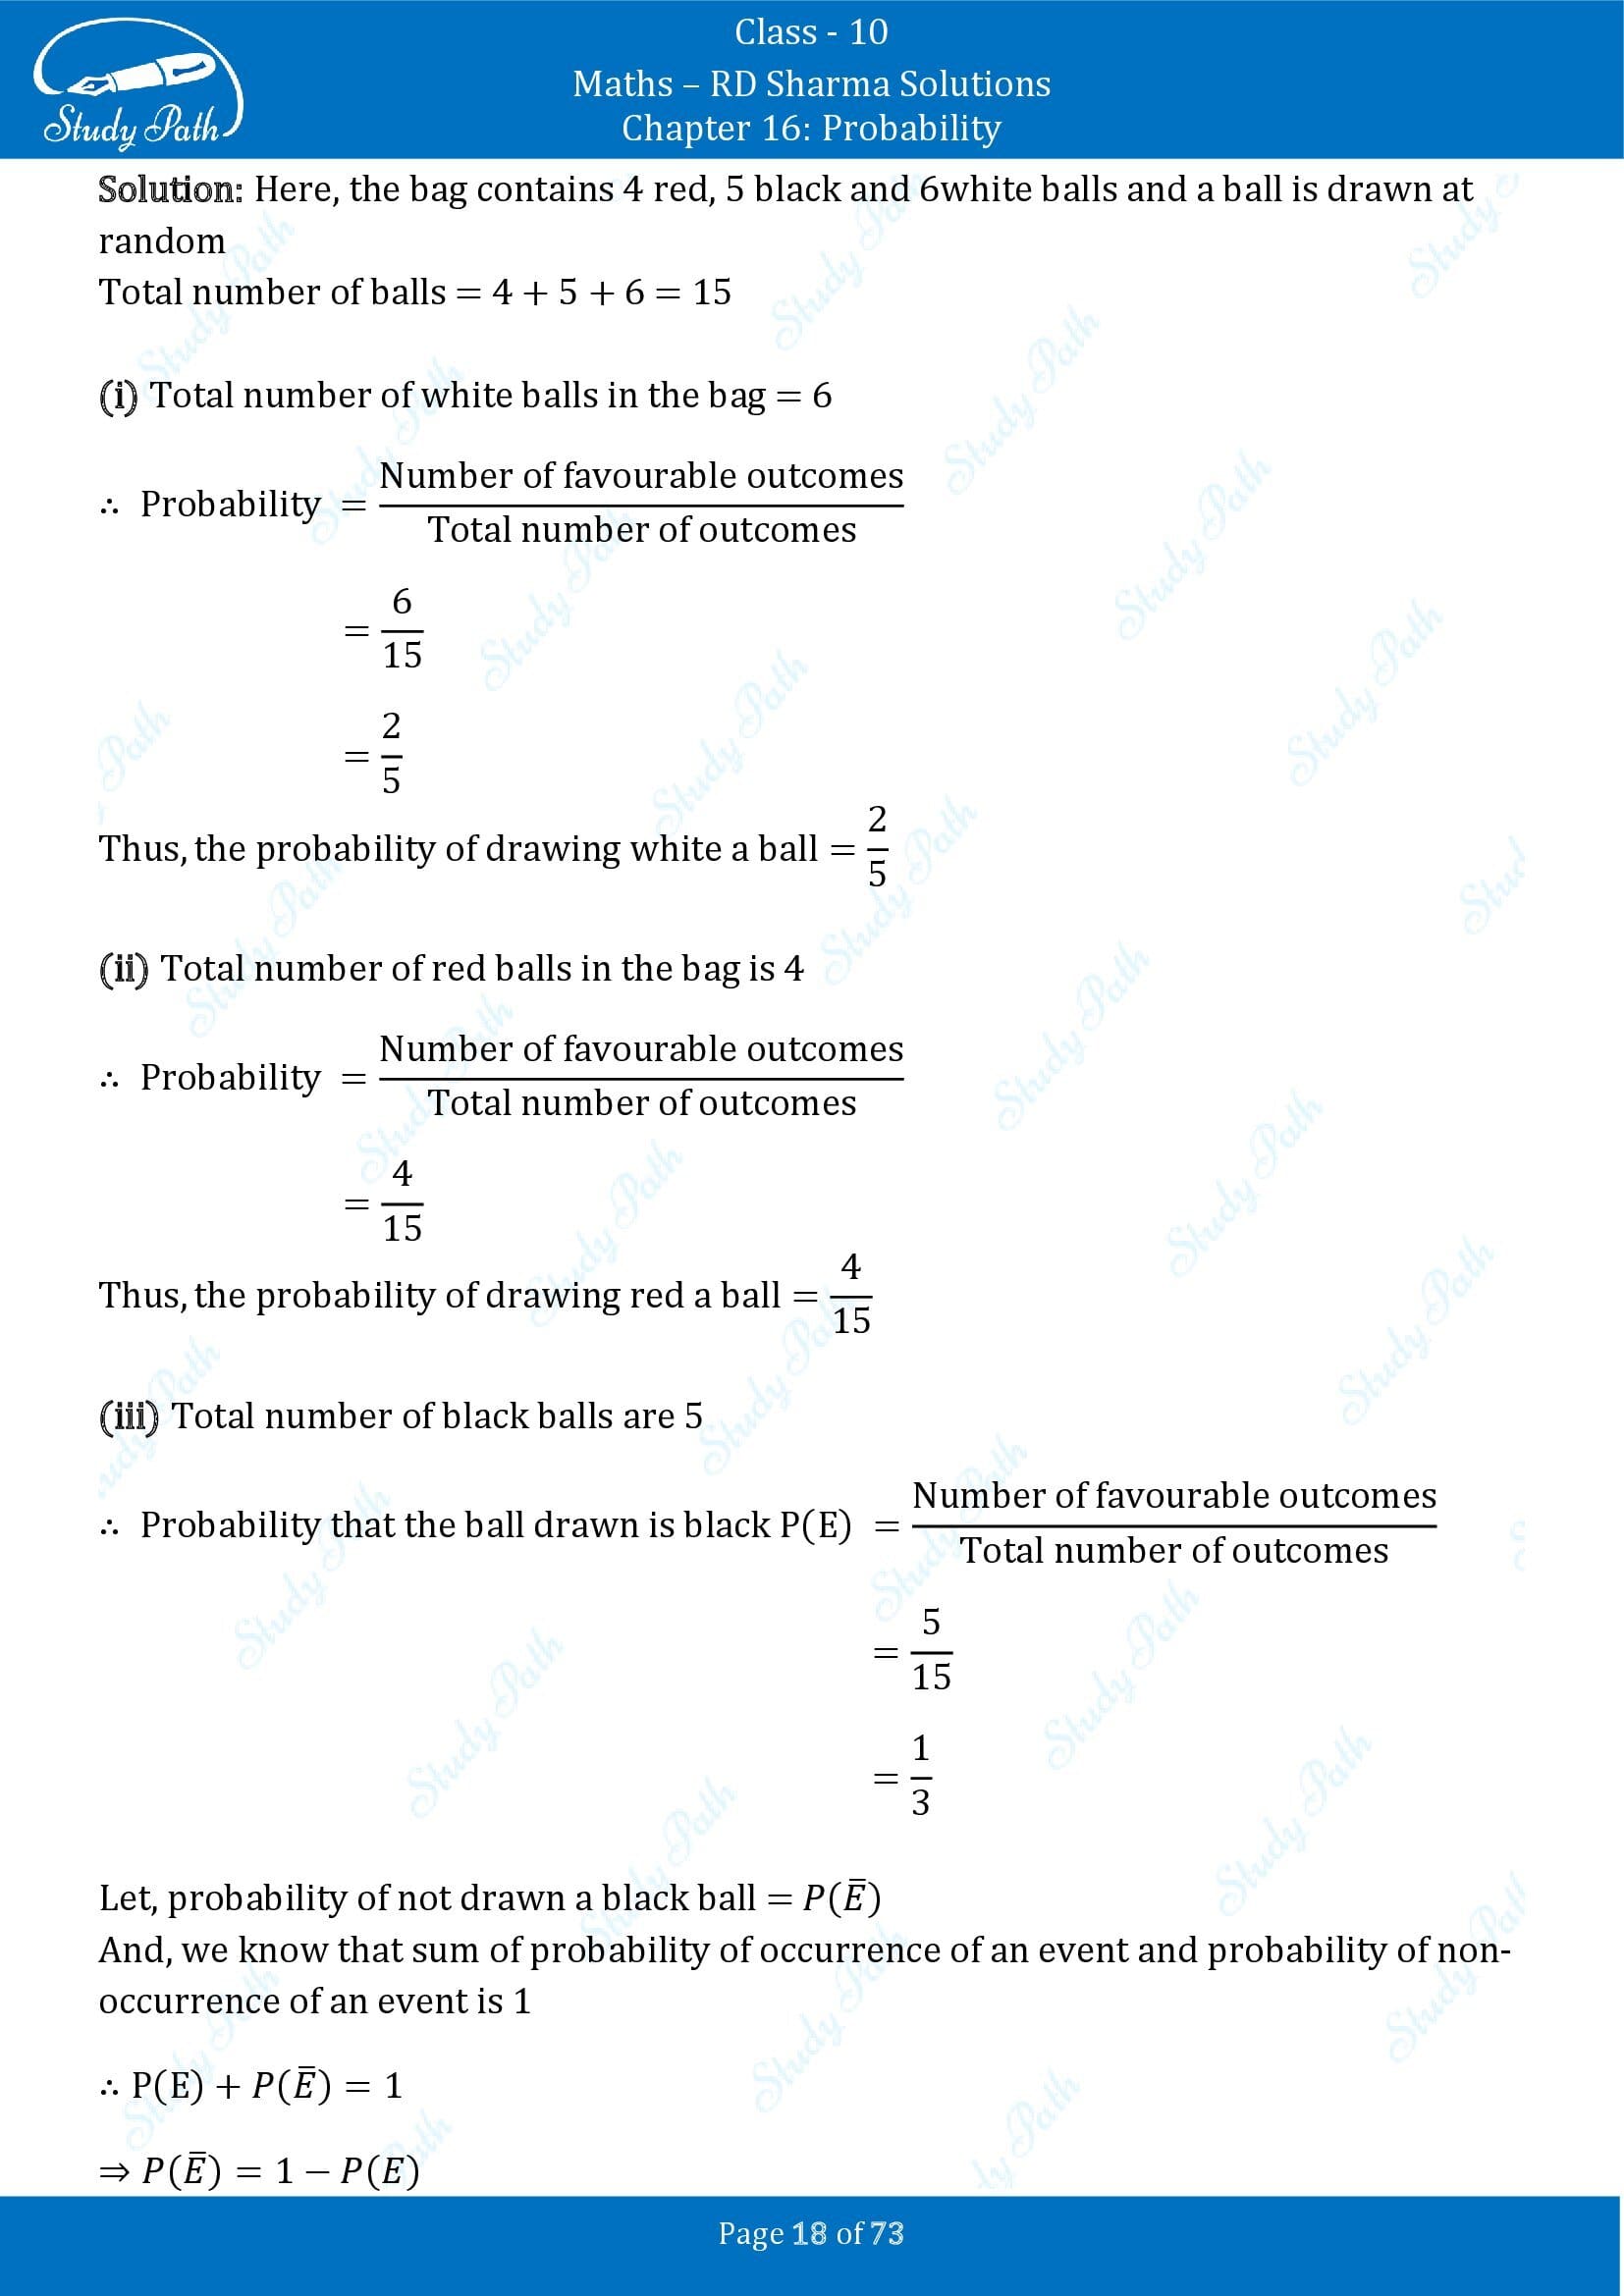 RD Sharma Solutions Class 10 Chapter 16 Probability Exercise 16.1 00018